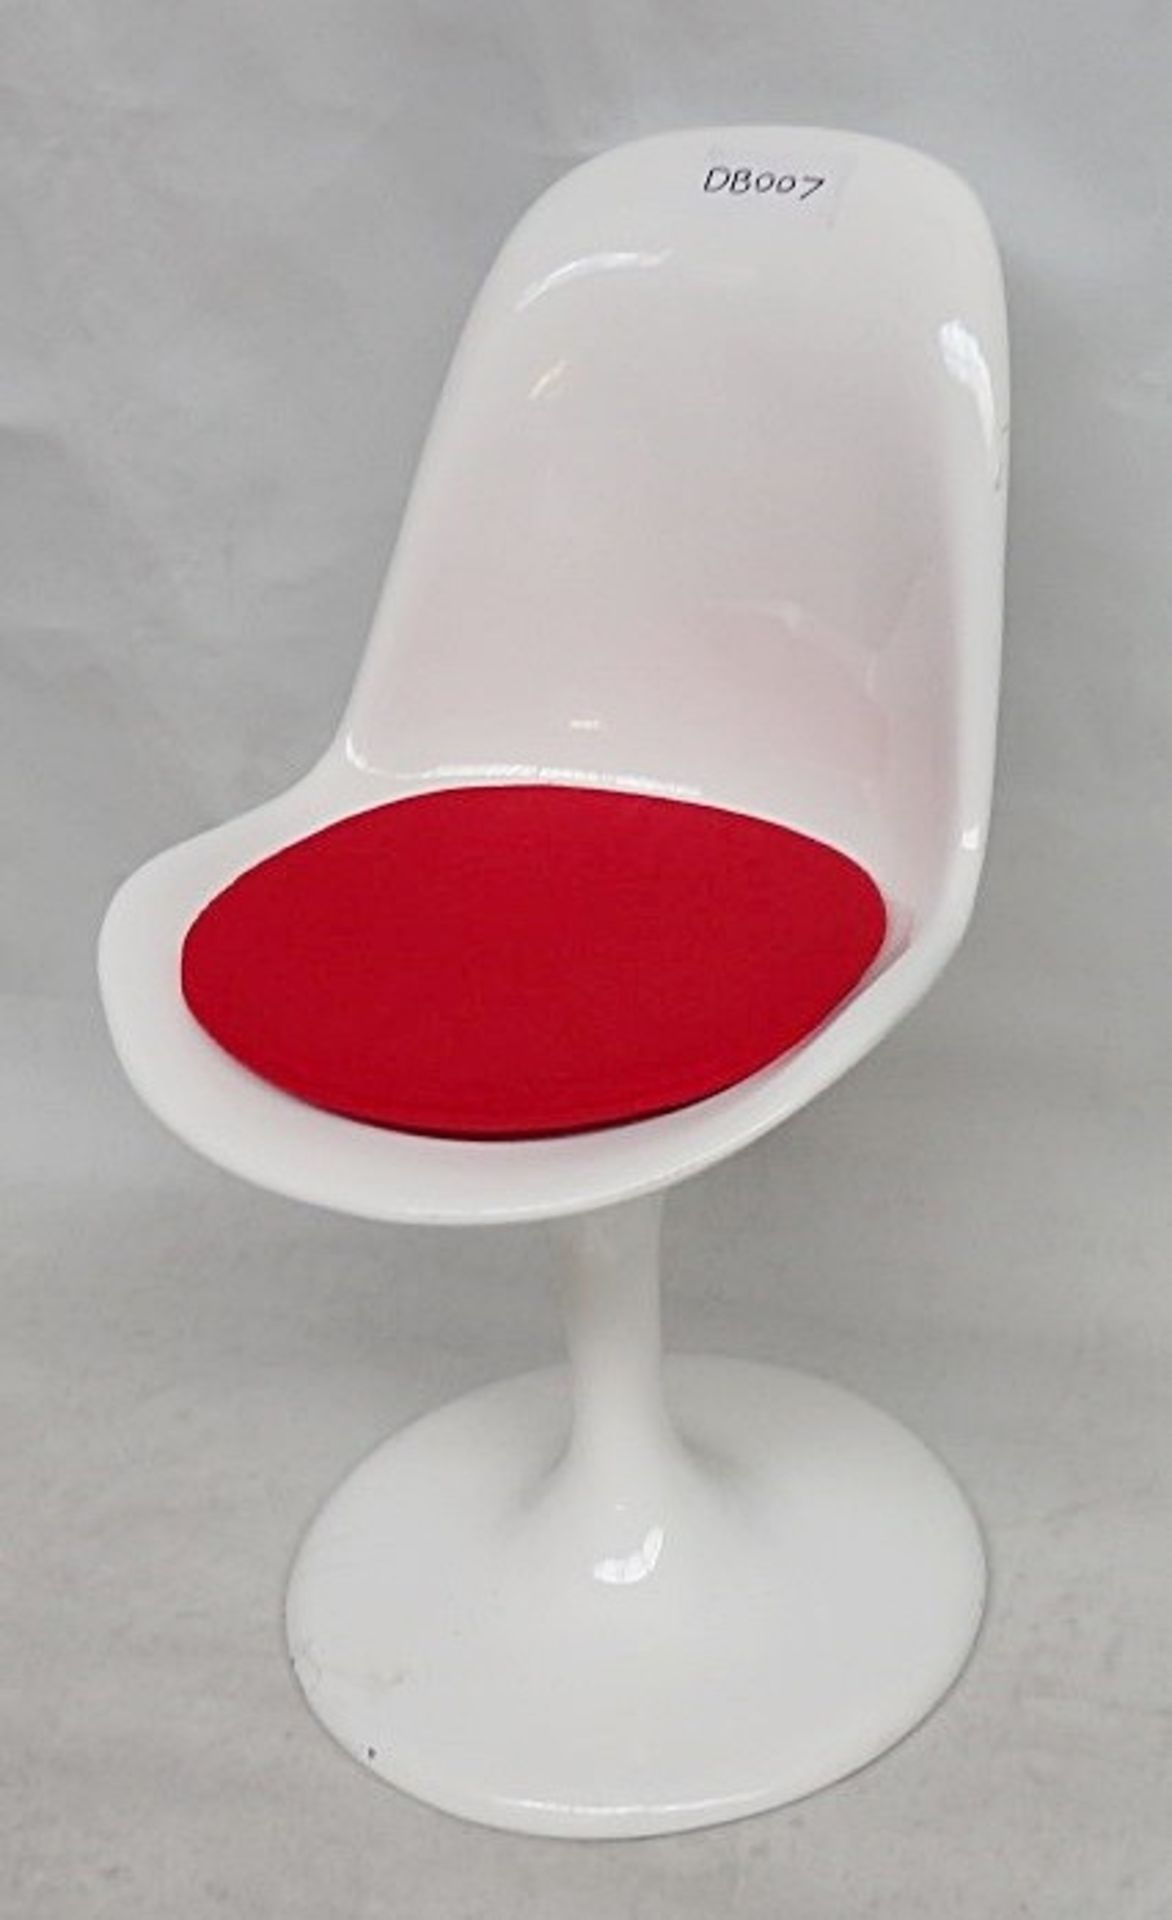 1 x Retro Style Swivel Chair With A White Hi-gloss Finish - Includes Cushion As Shown - - Image 12 of 14